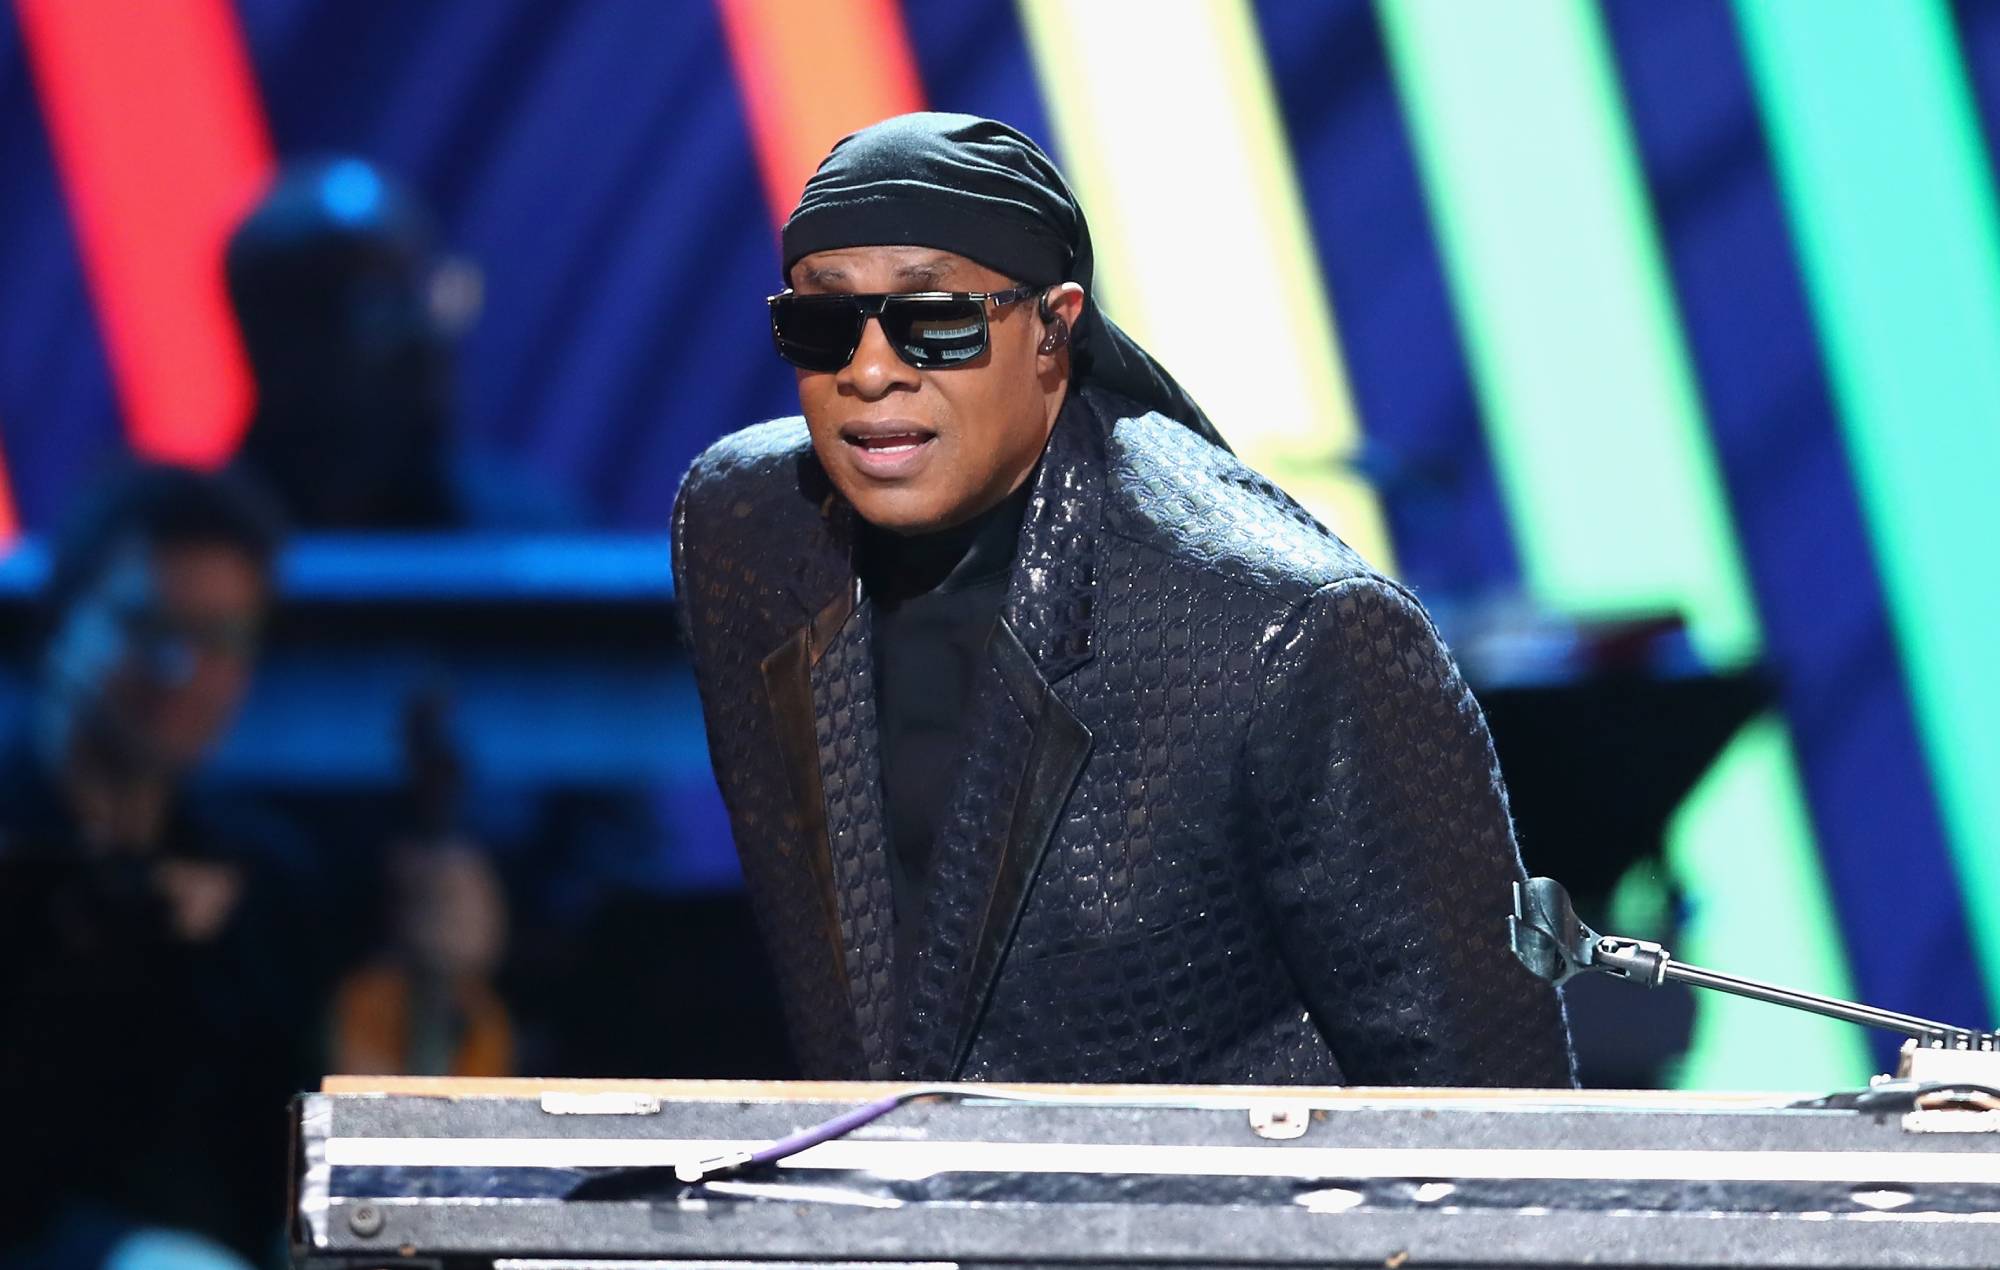 10 Interesting Facts About Stevie Wonder